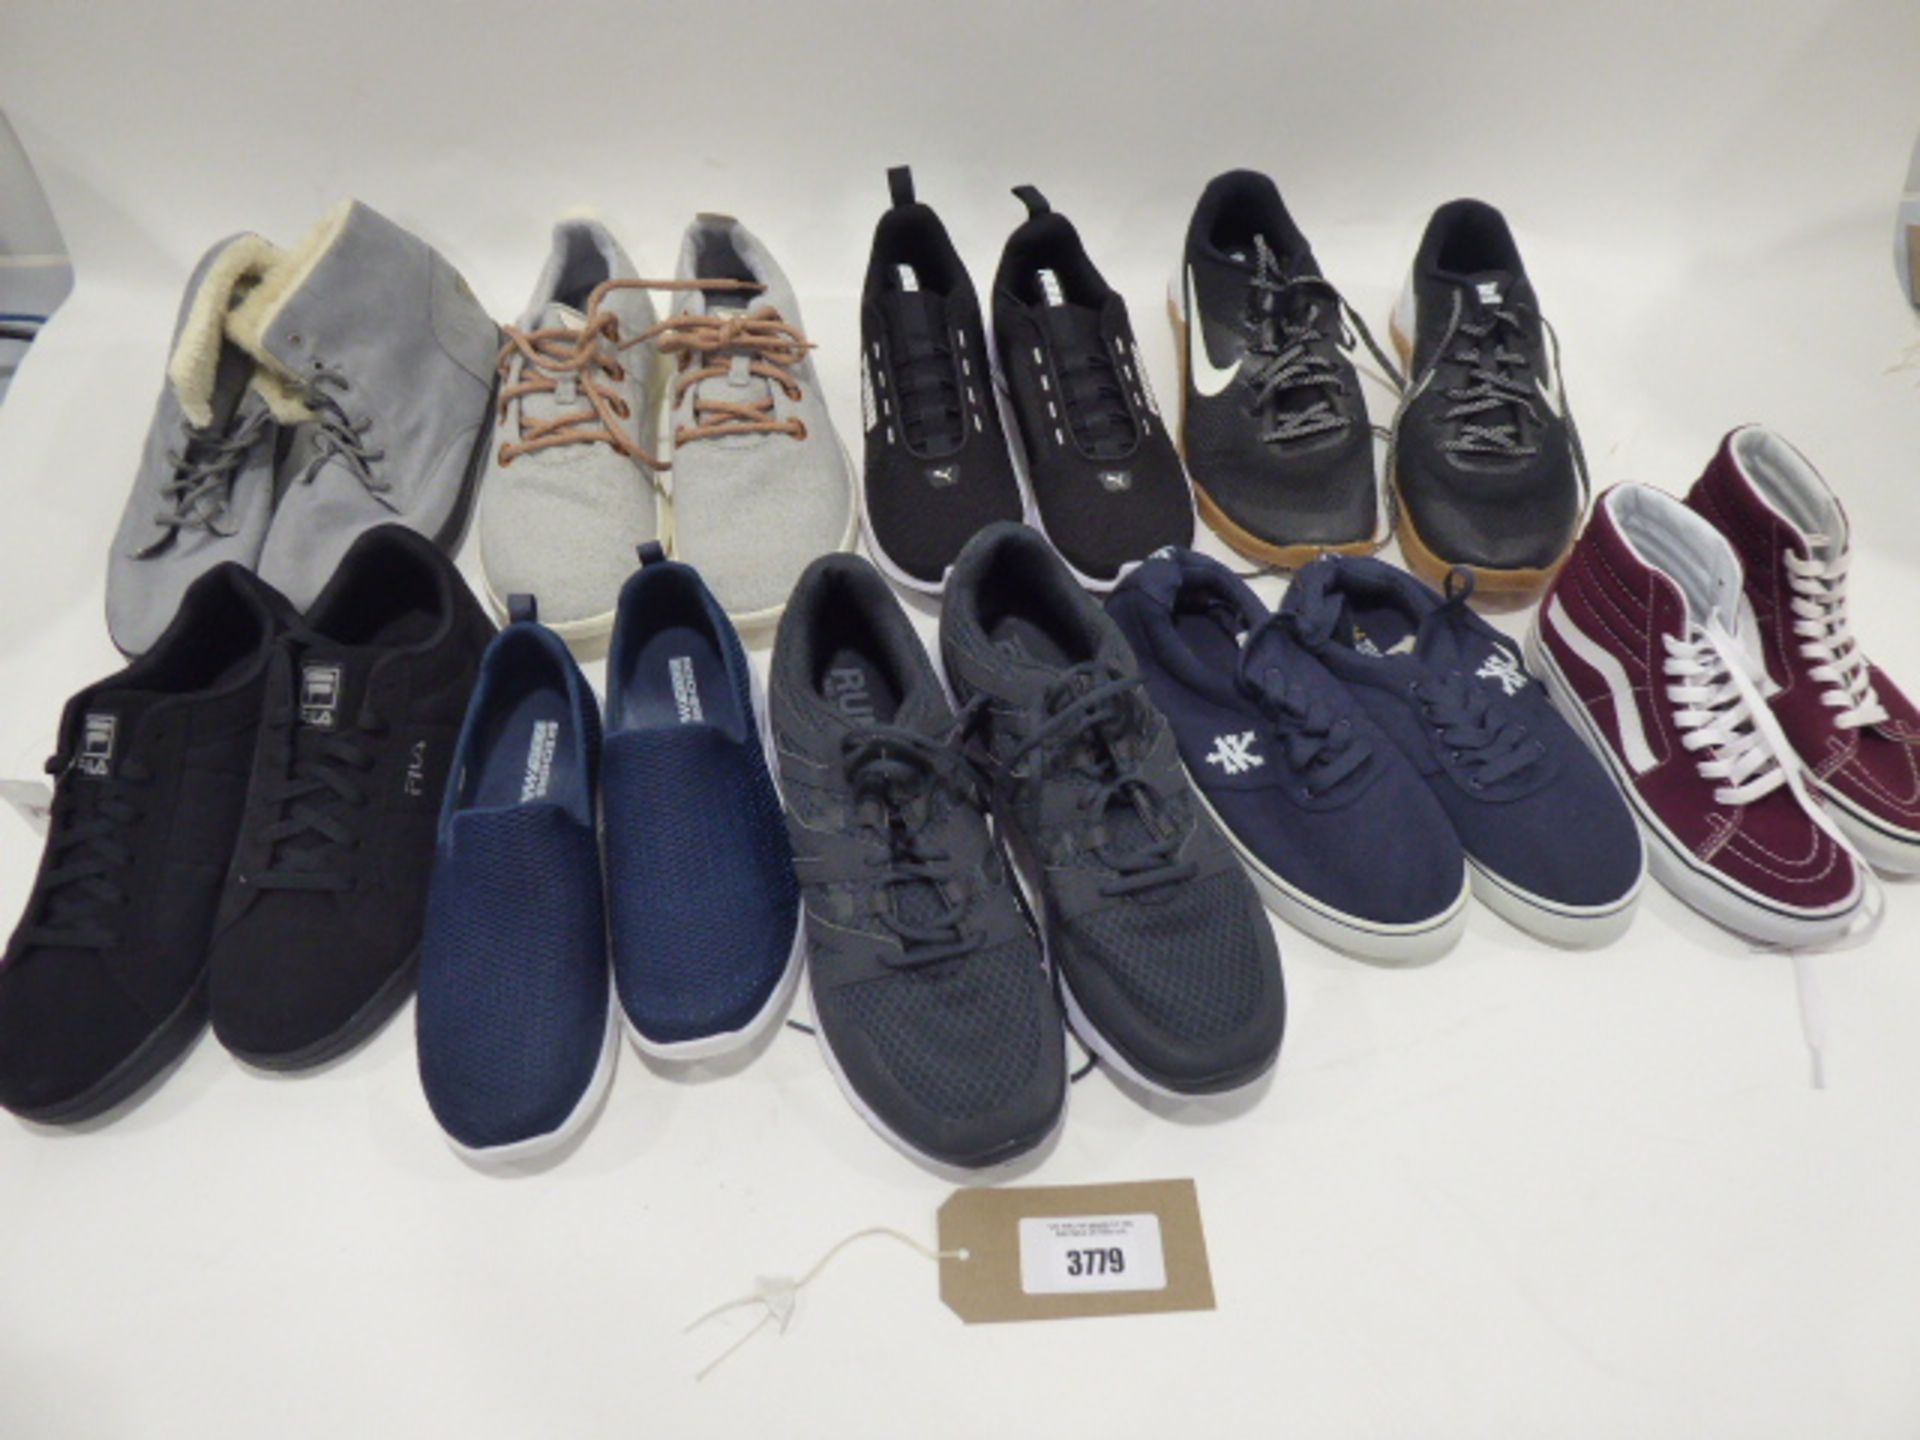 A selection of trainers with brands including Karrimor, Nike, Adidas, Vans, Sketchers, Puma and more